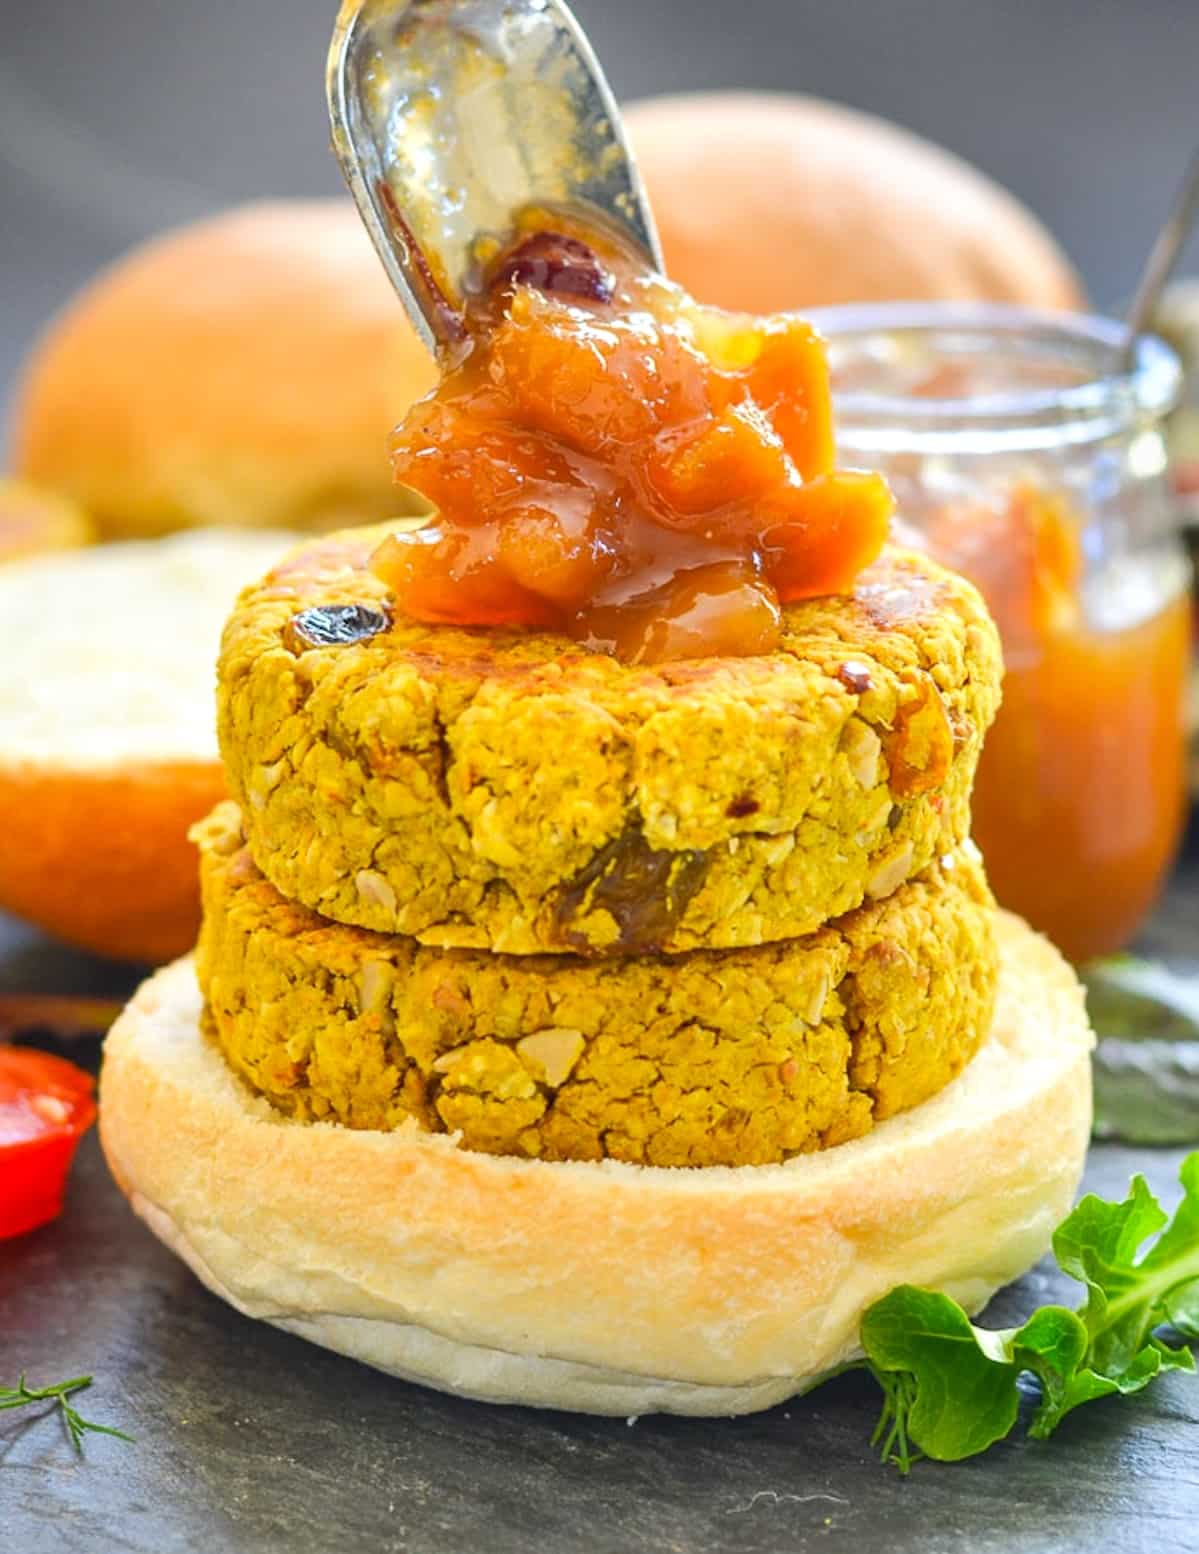 2 stacked curried chickpea burgers on a bun with a dollop of mango chutney/